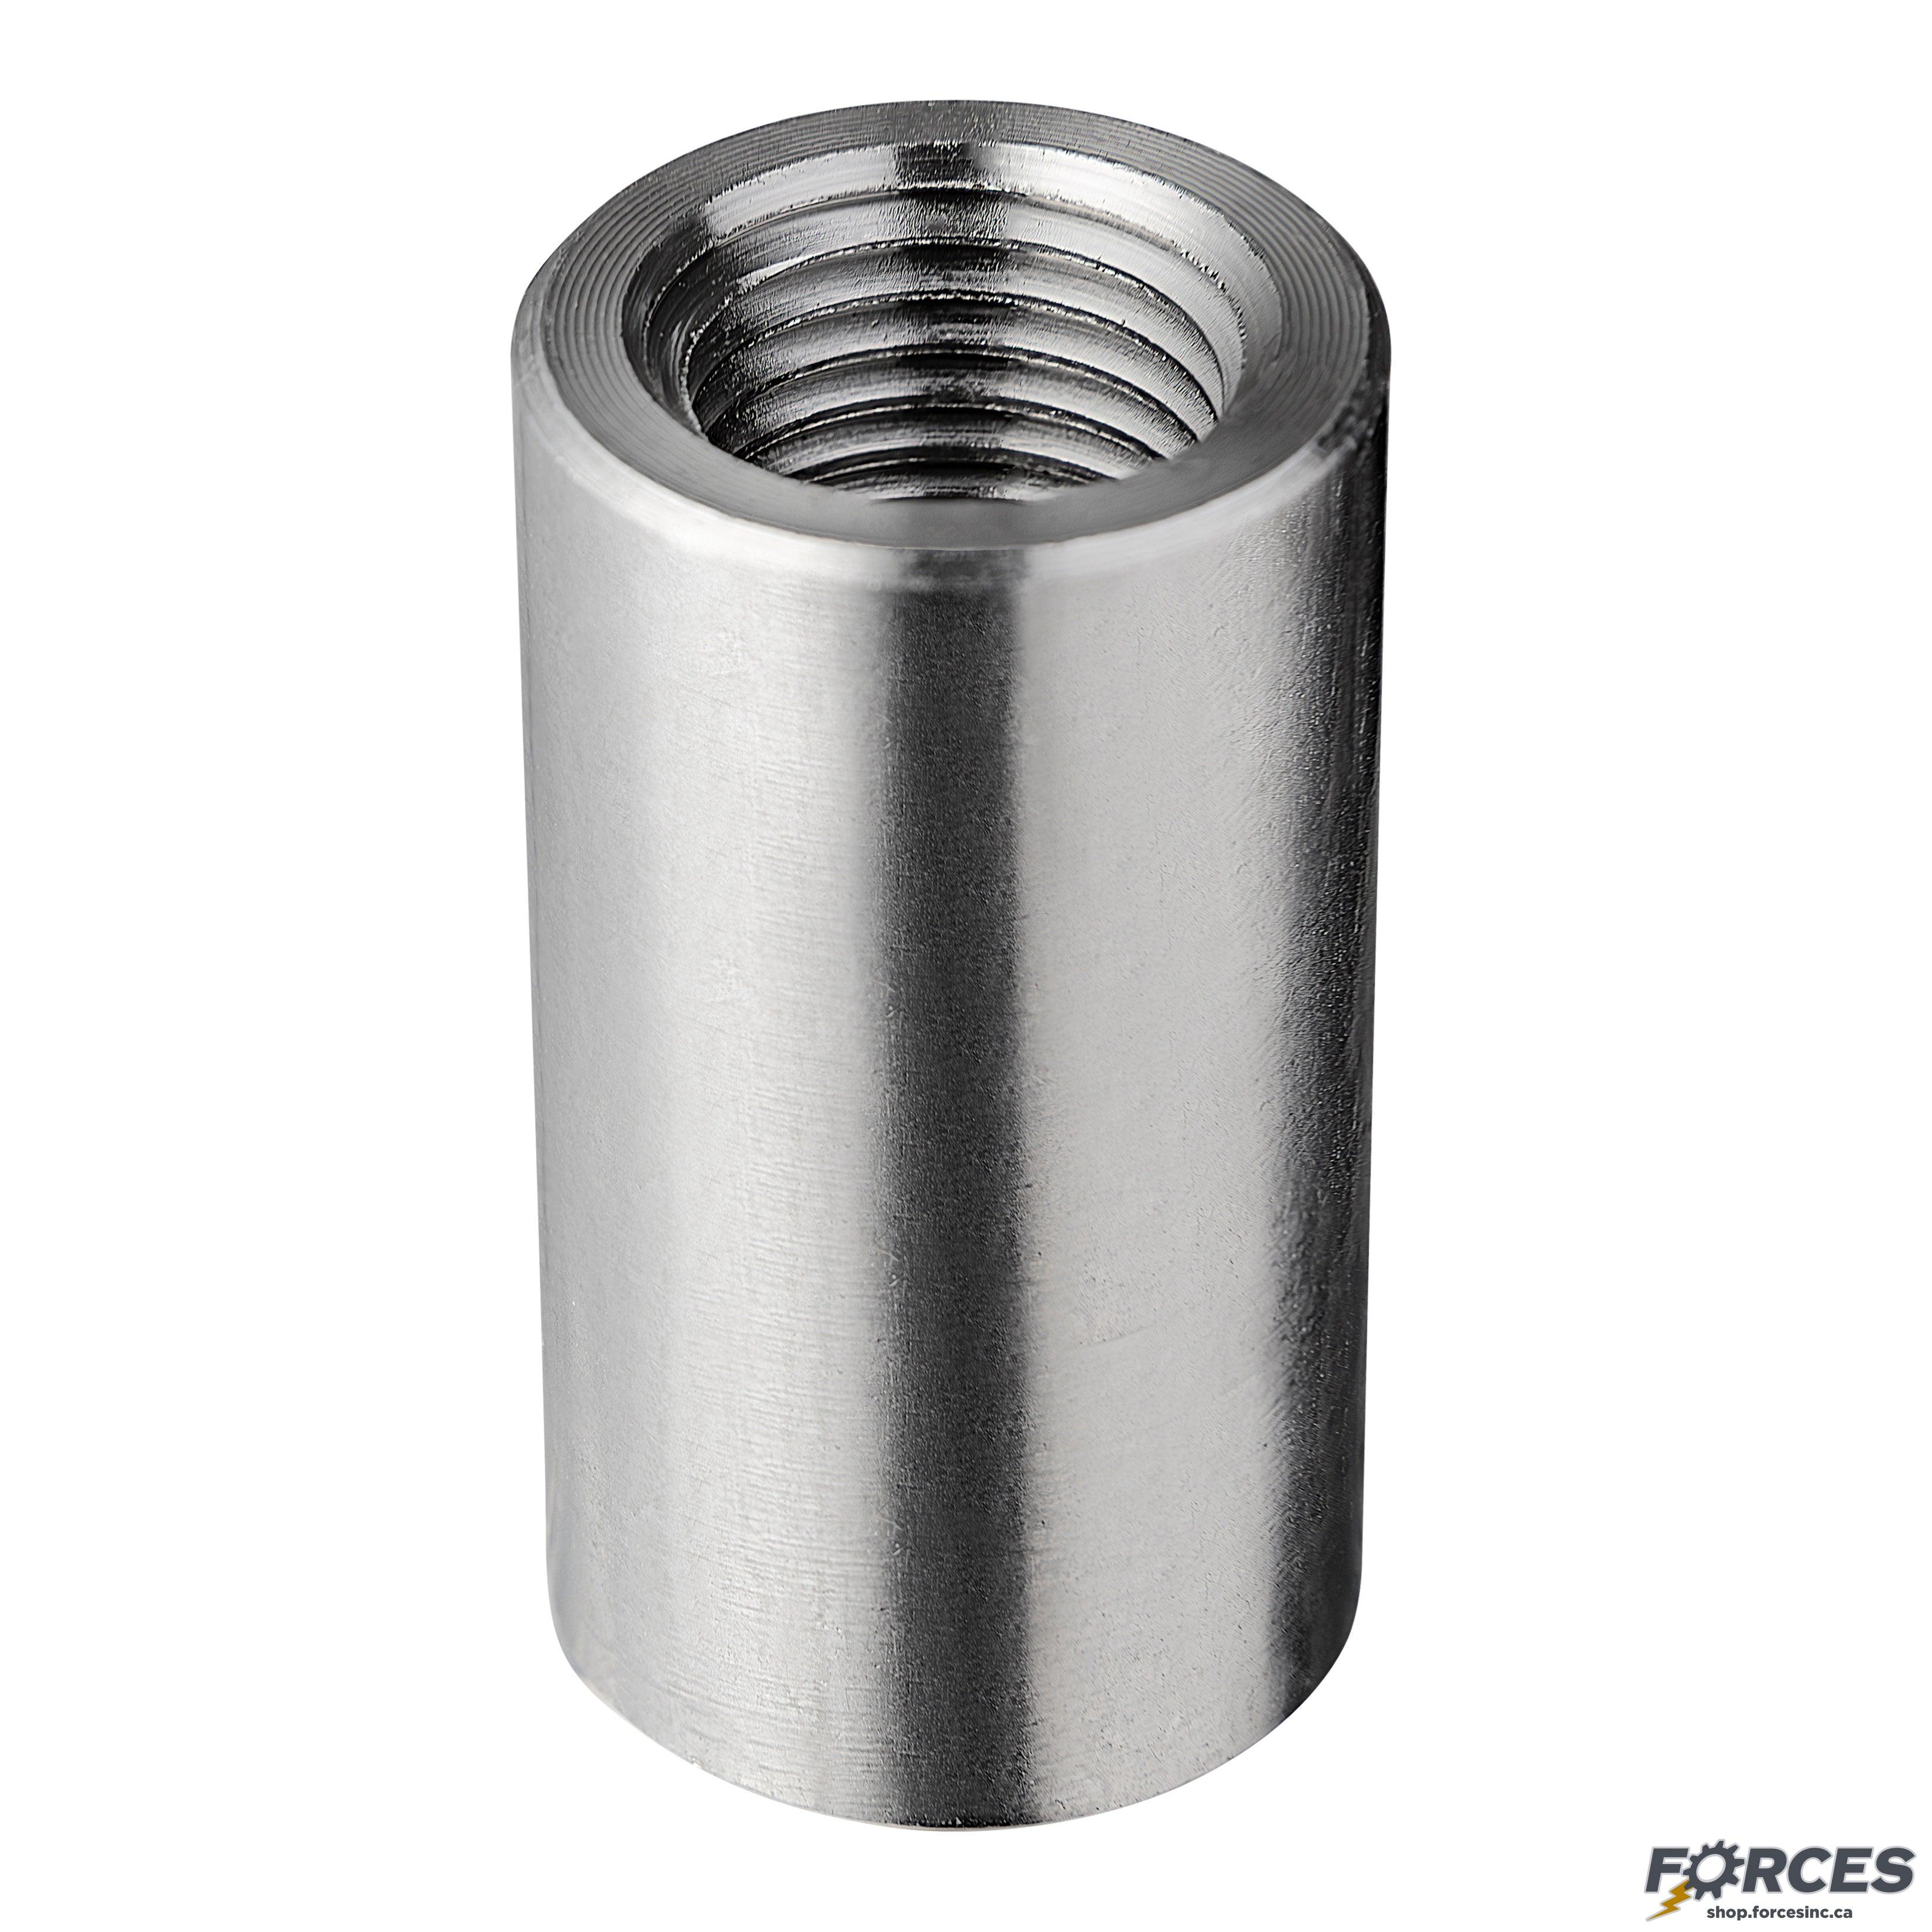 1/2" Full Coupling NPT #3000 - Stainless Steel 316 - Forces Inc